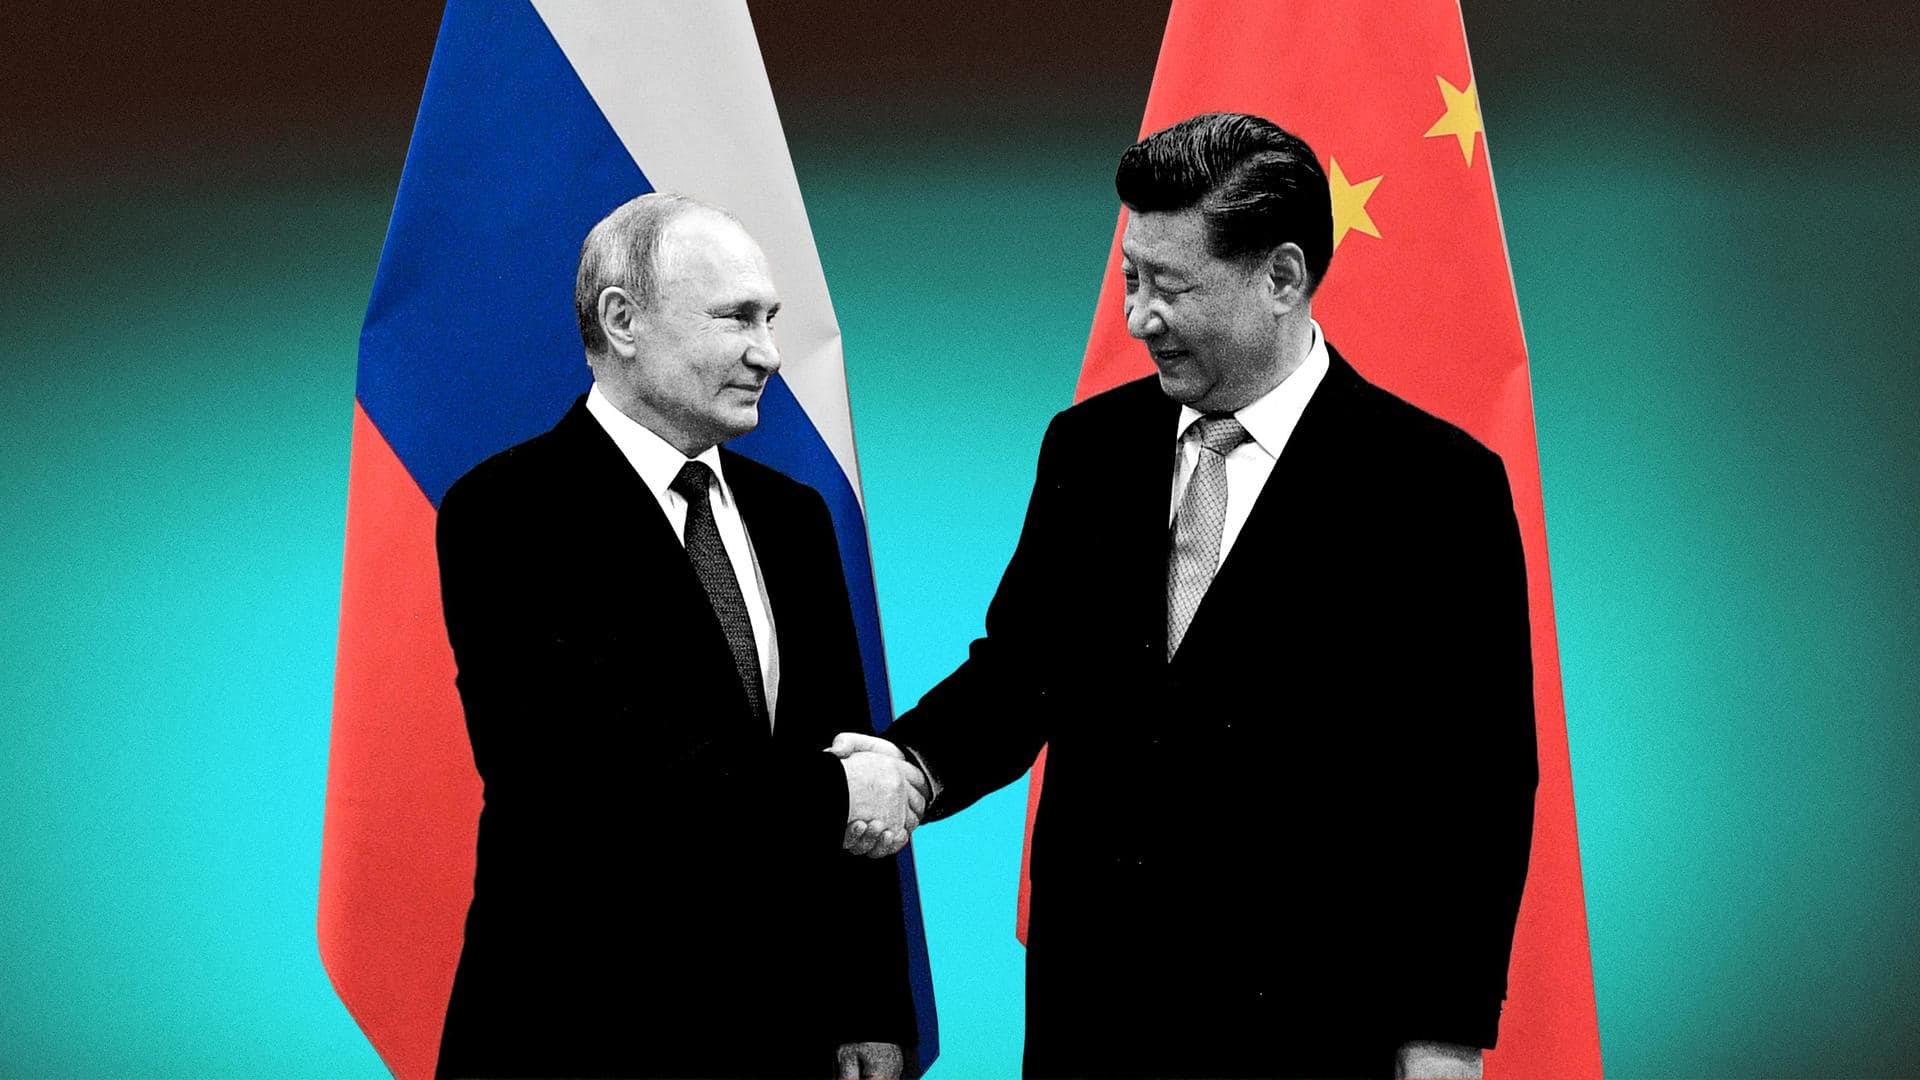 Xi Jinping to visit Russia soon, might mediate Ukraine conflict